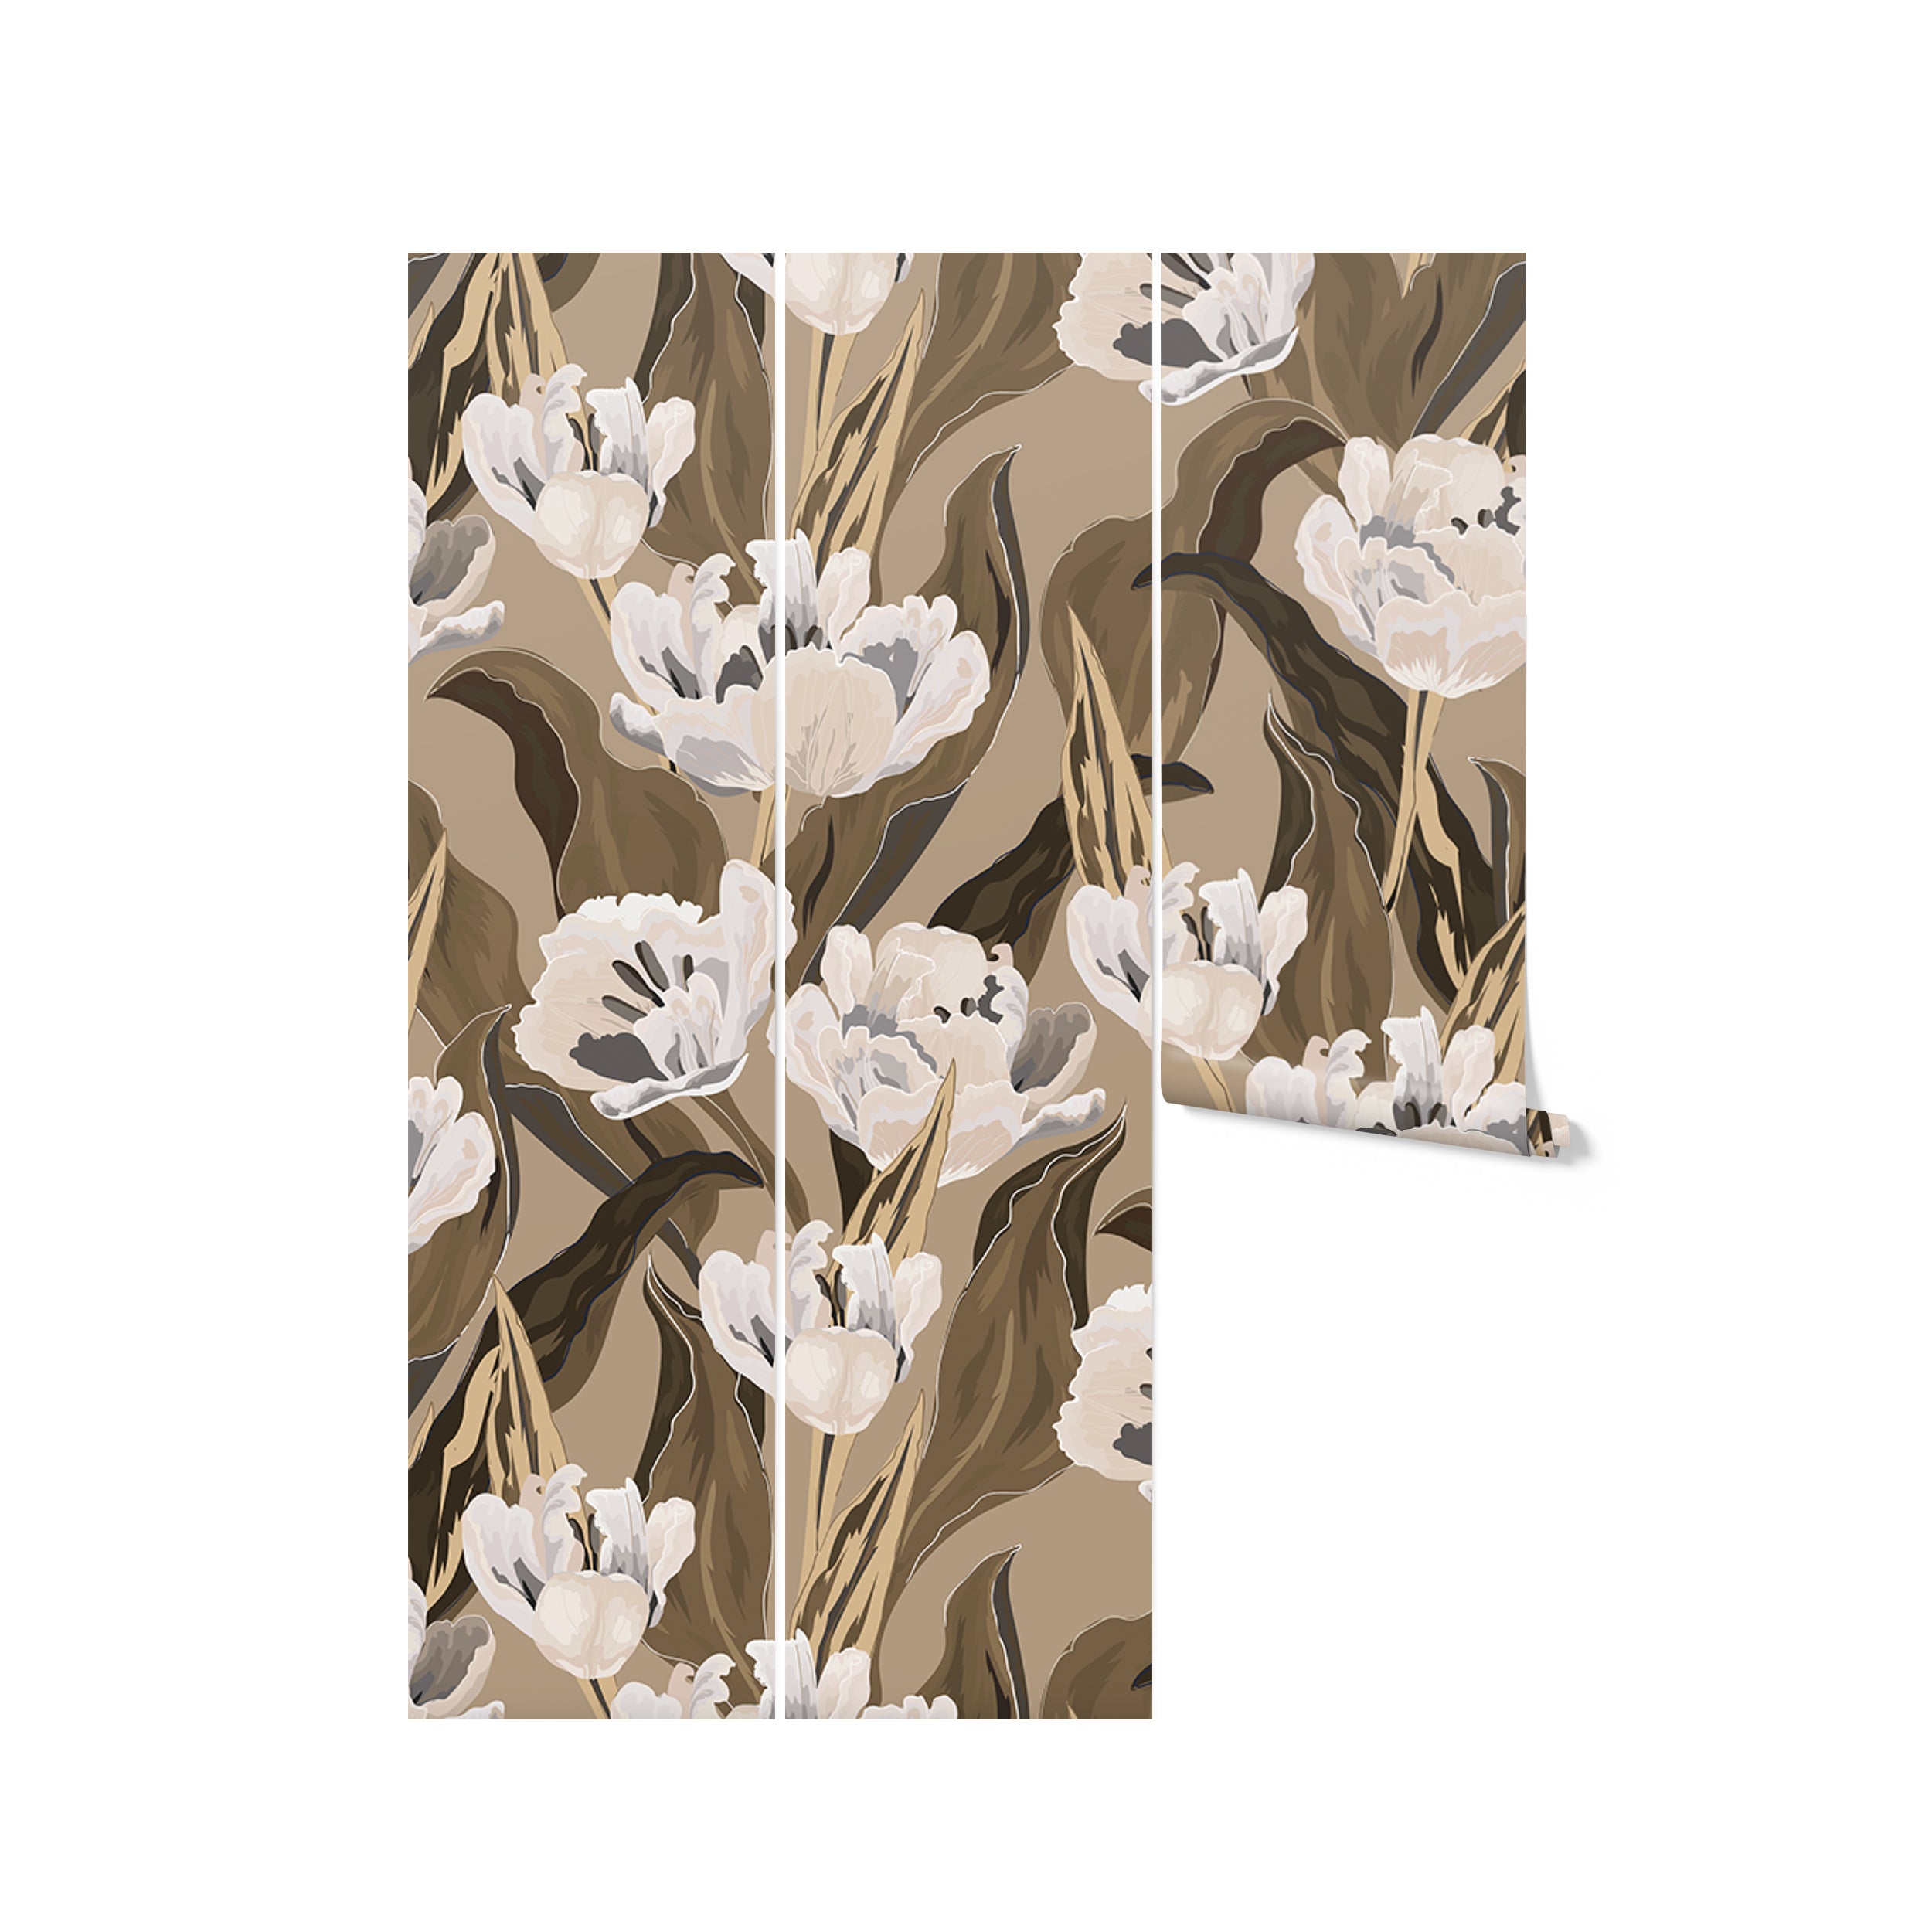 A rolled piece of Blooming Tulips Wallpaper, displaying the elegant floral pattern with white tulips and dark leaves on a taupe background. The image highlights the texture and color detail of the wallpaper, ready for installation in a stylish home setting.